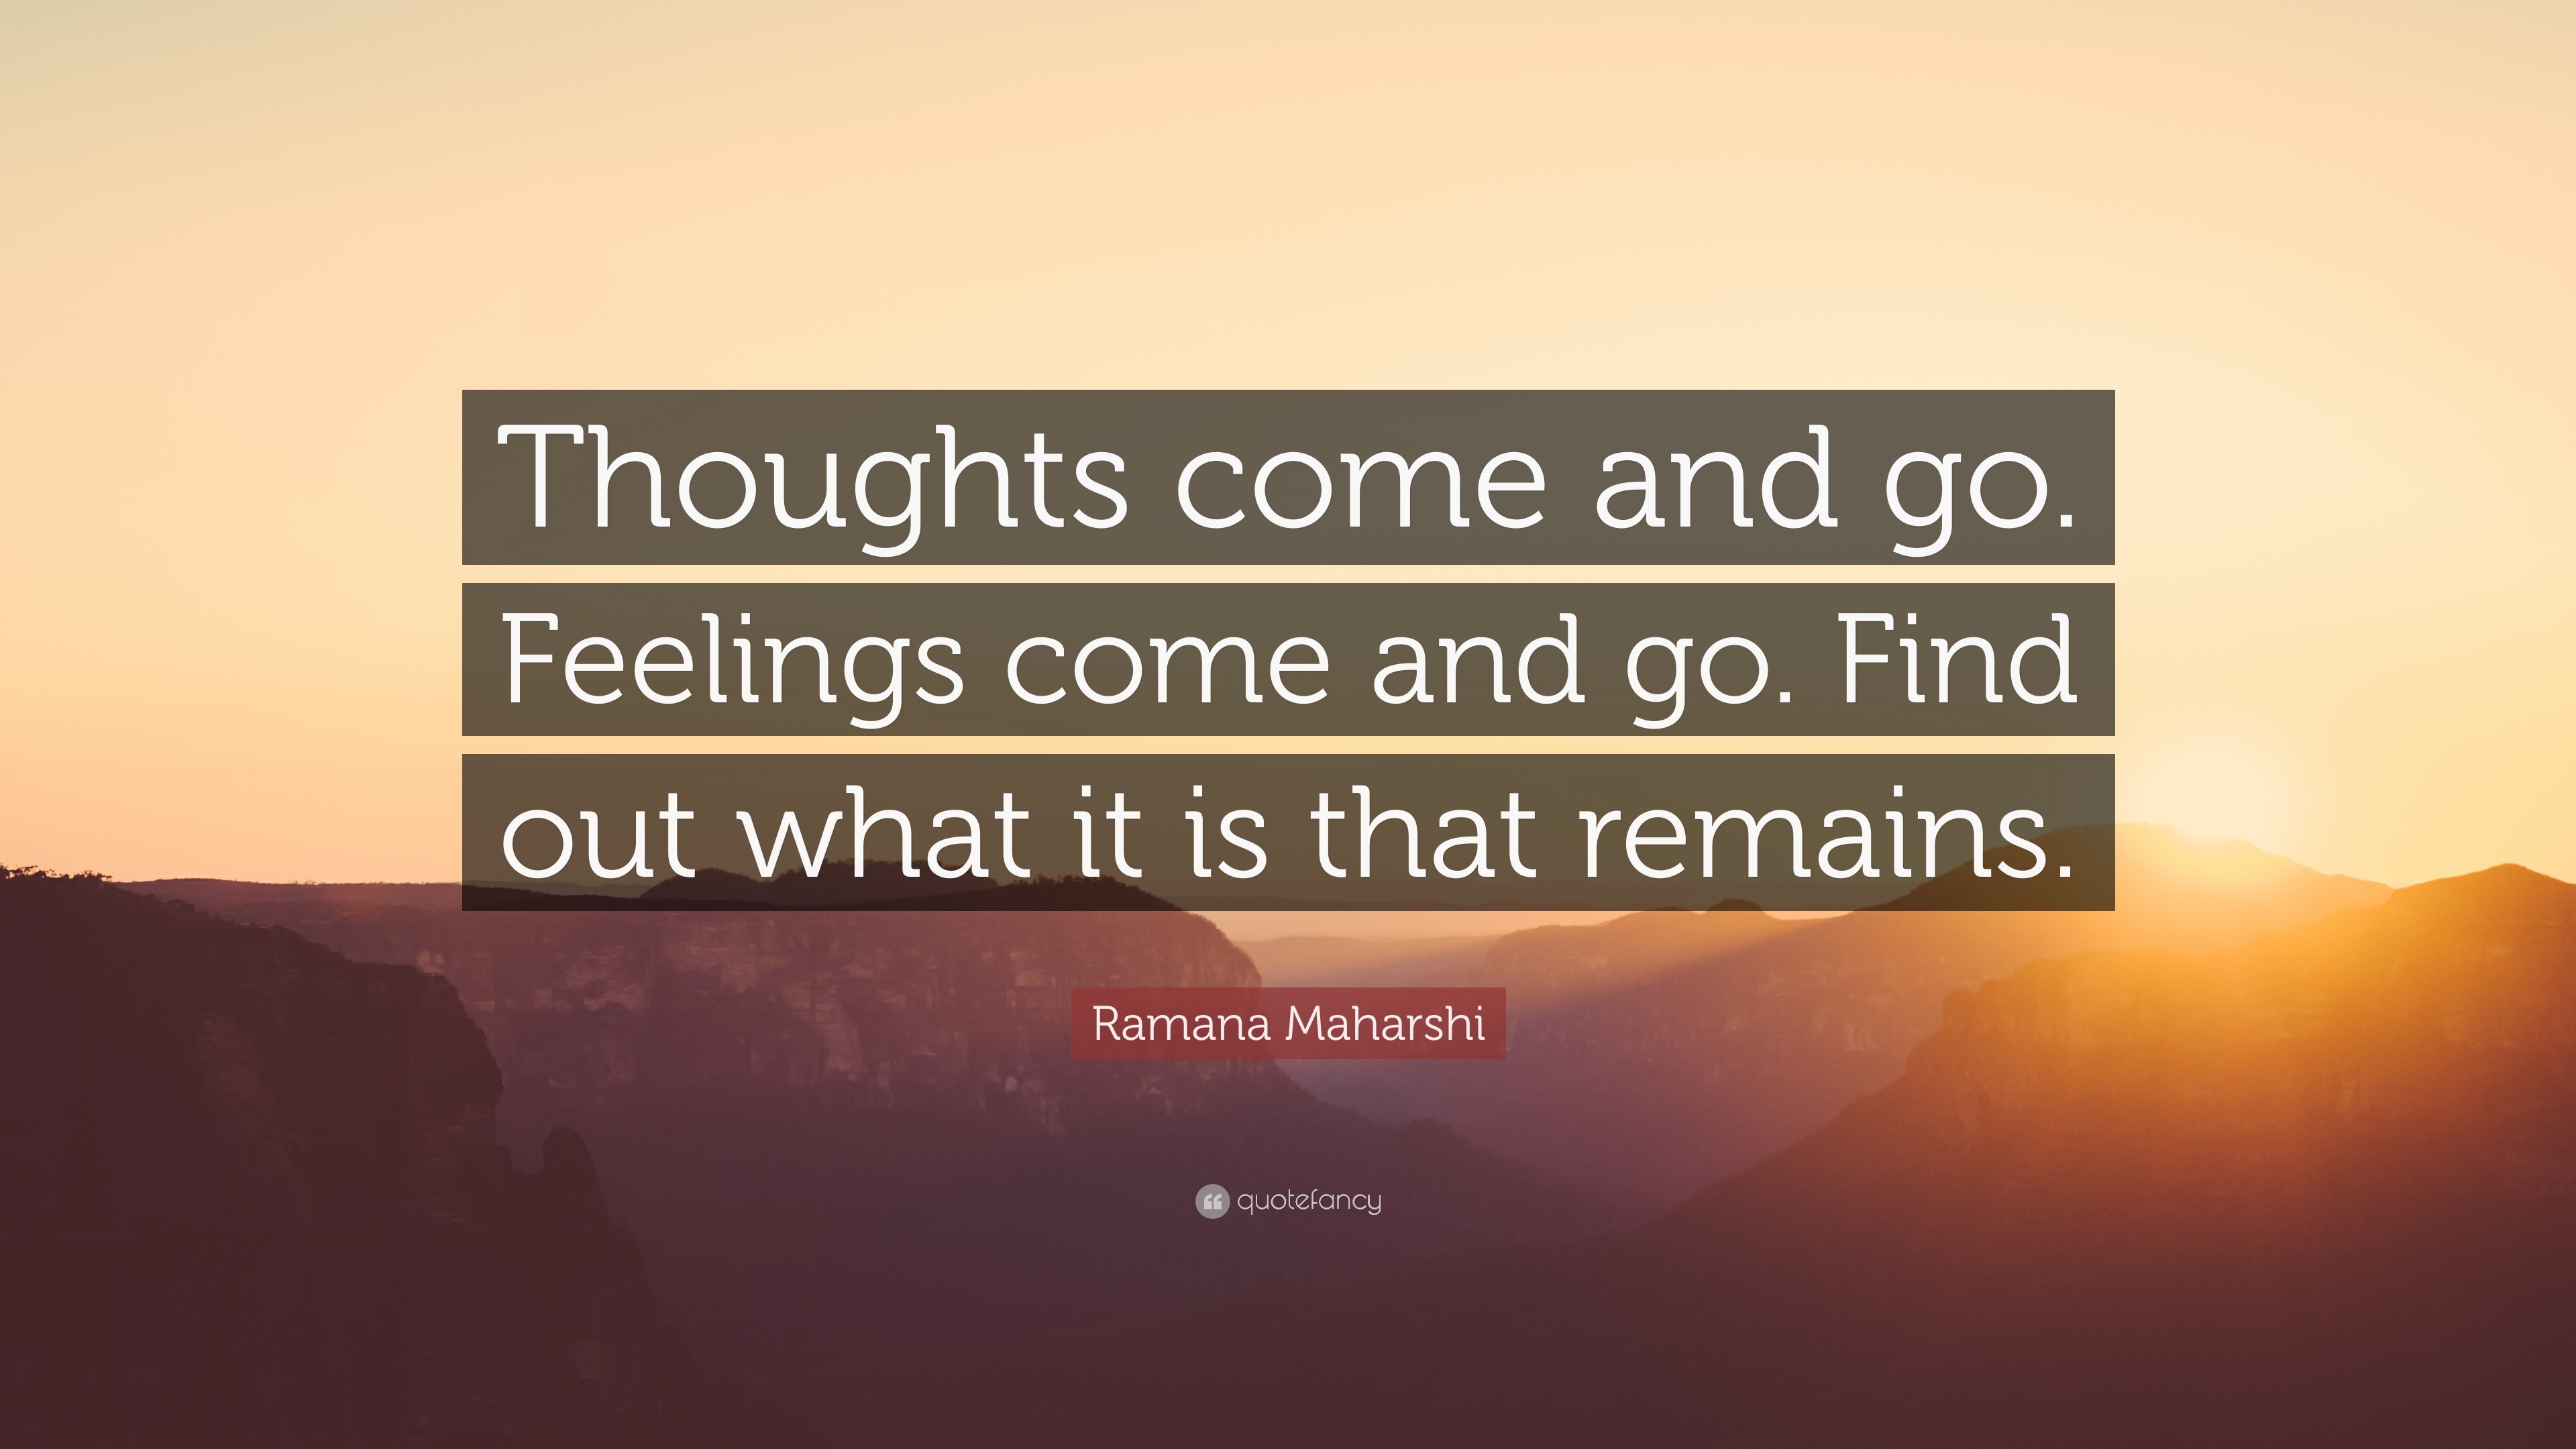 Ramana Maharshi Quote: “Thoughts come and go. Feelings come and go ...